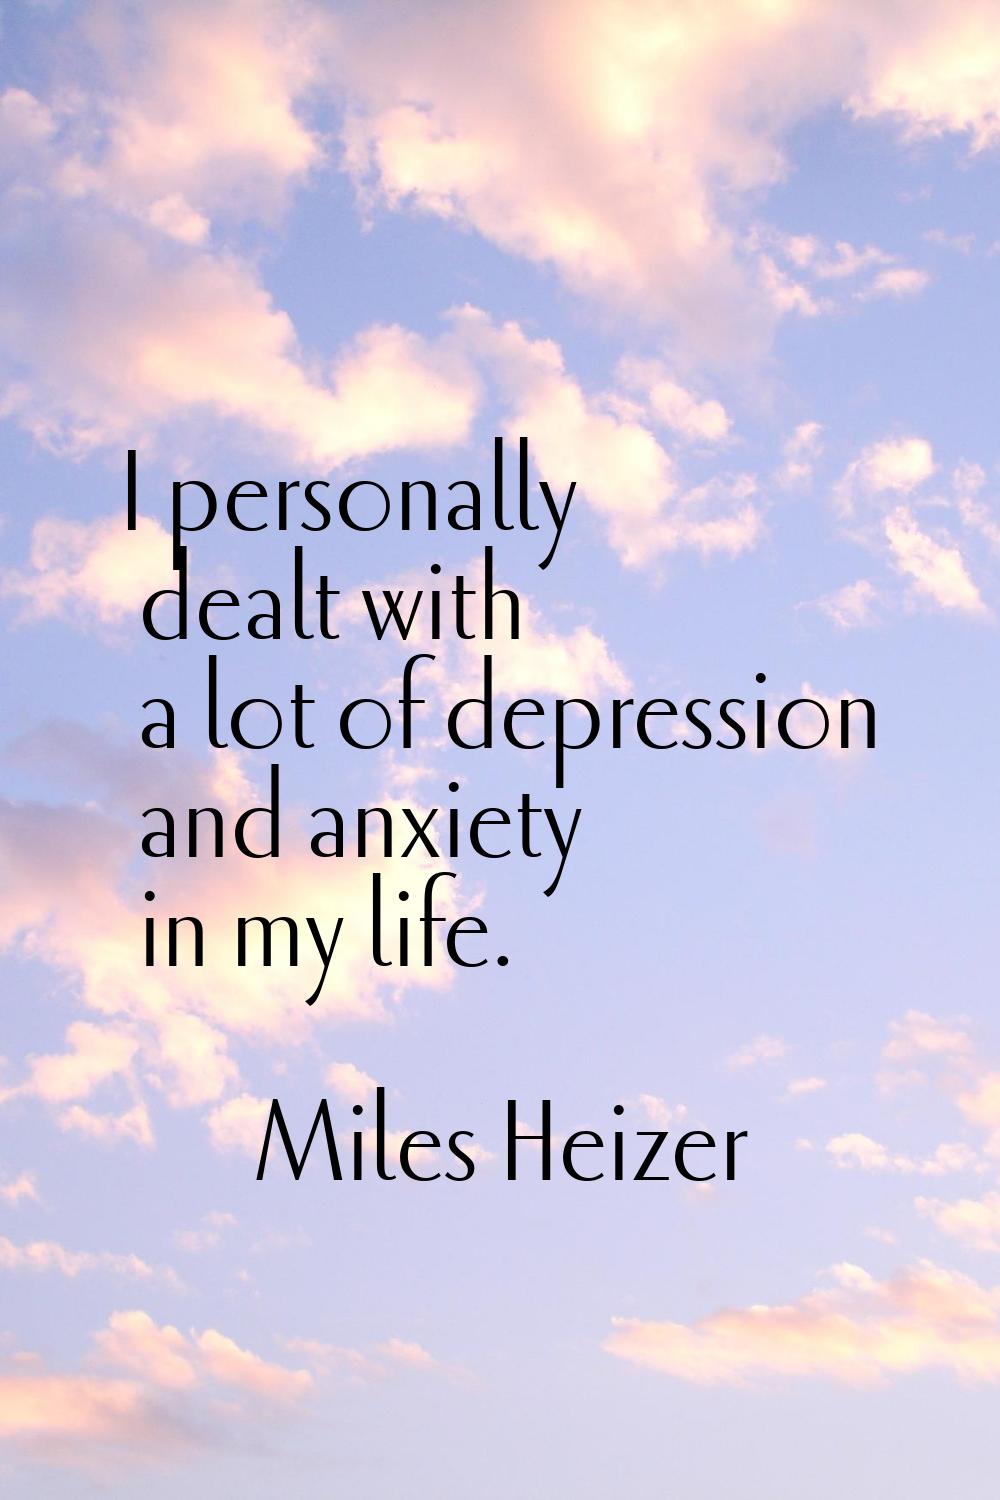 I personally dealt with a lot of depression and anxiety in my life.